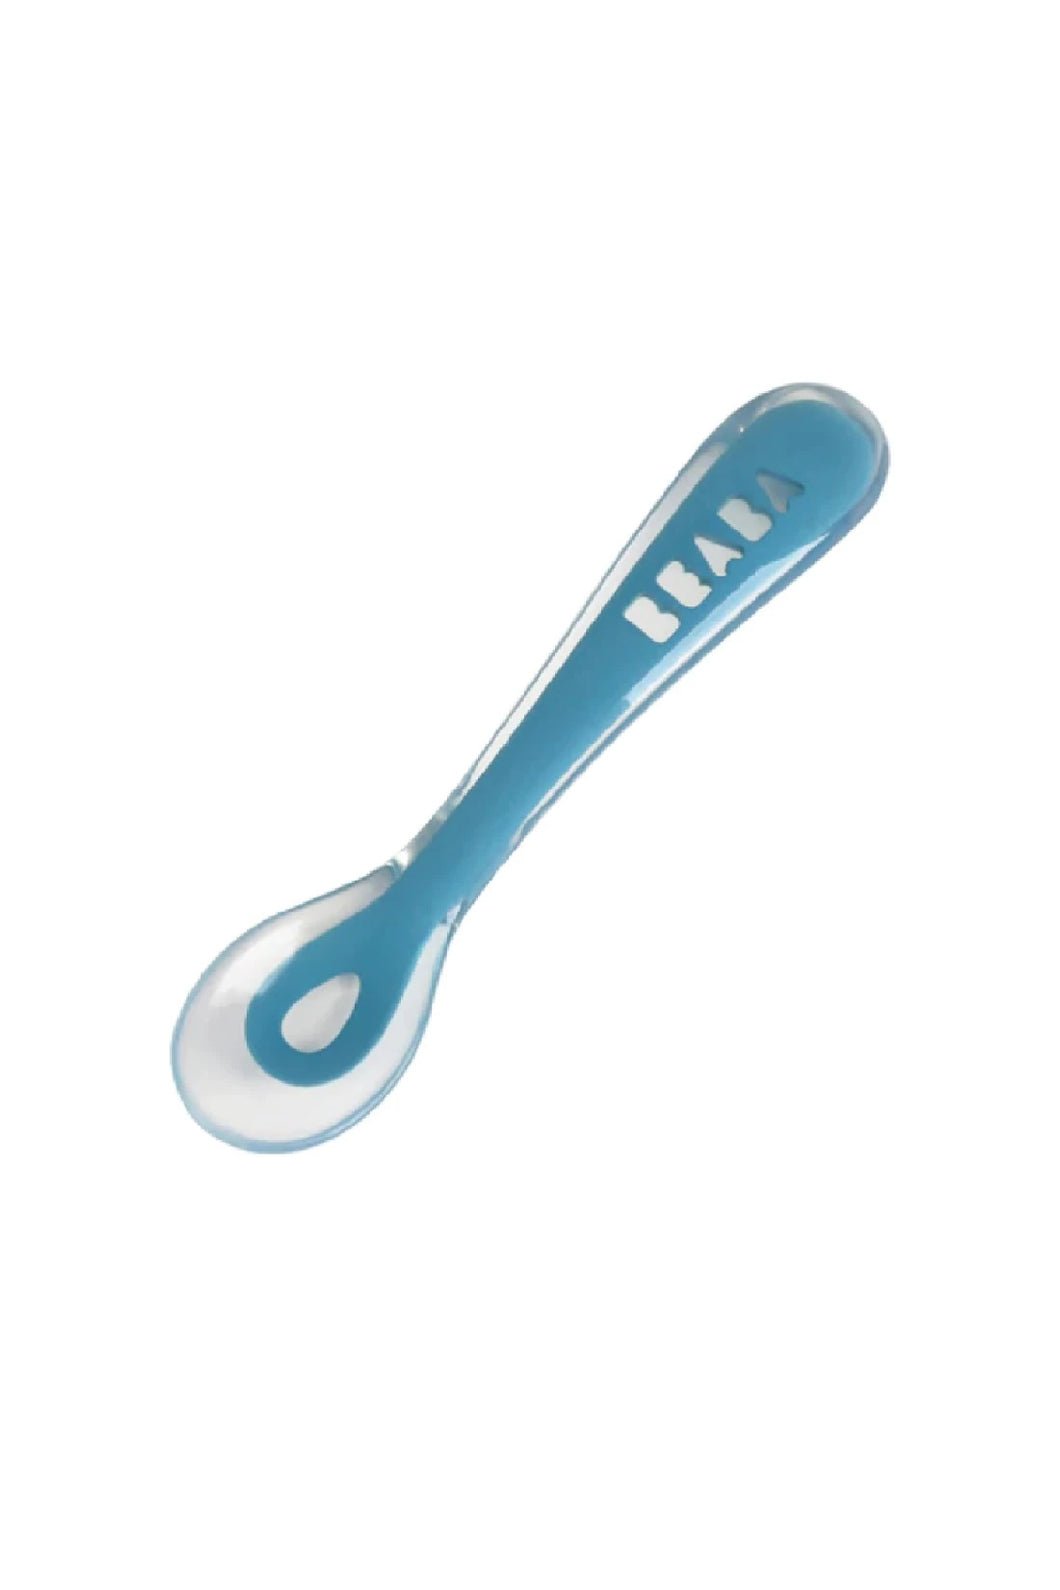 Beaba 2Nd Age Soft Silicone Spoon Blue 3